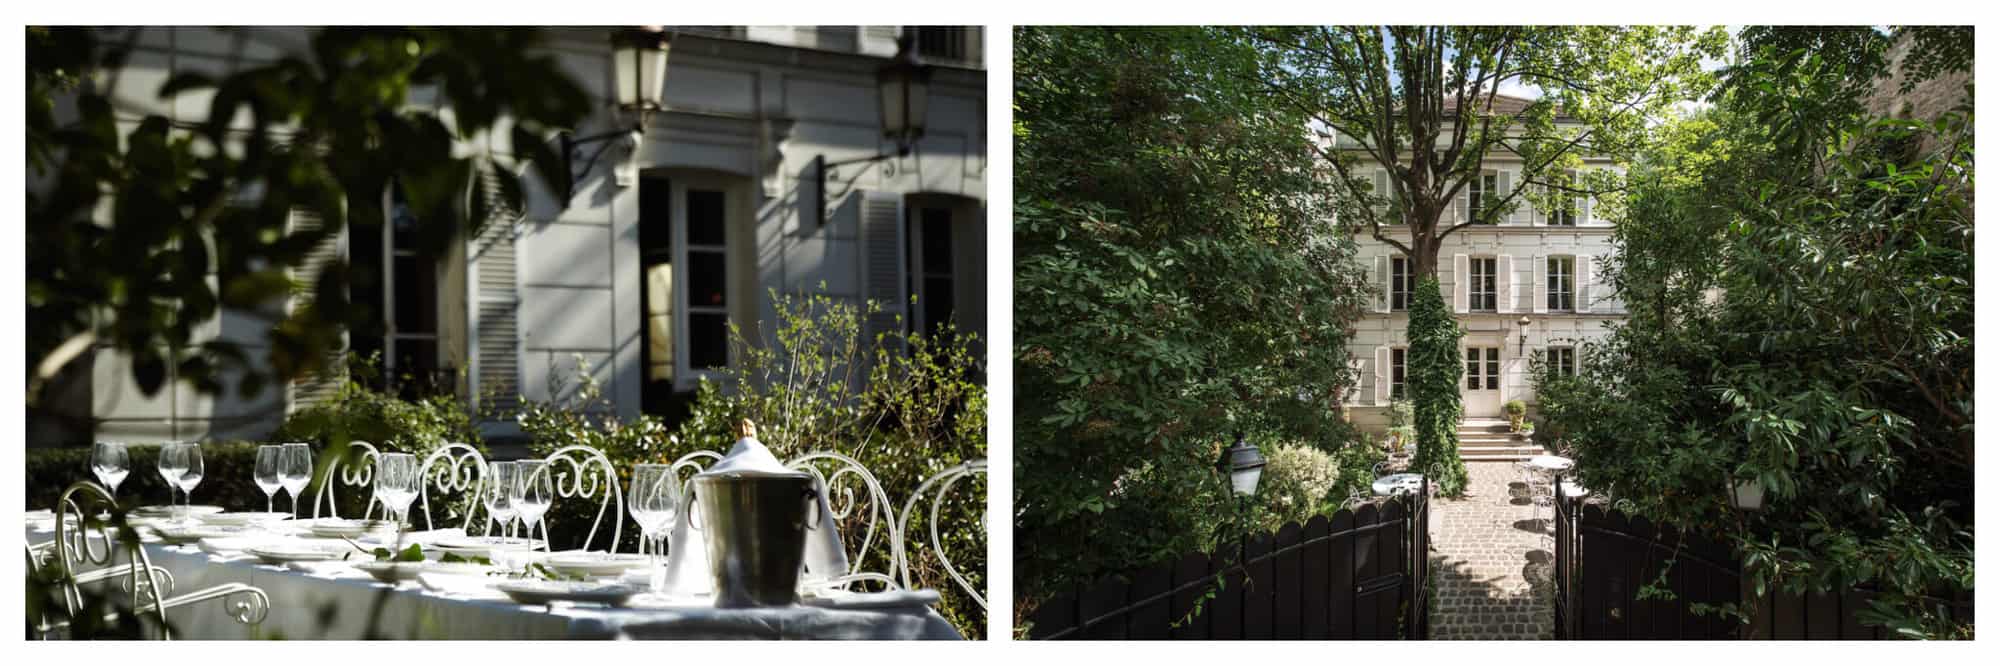 Left: a long white outdoor table and chairs in front of Hotel Particulier in Montmartre. Right: the facade and garden of Hotel Particulier in Montmartre.